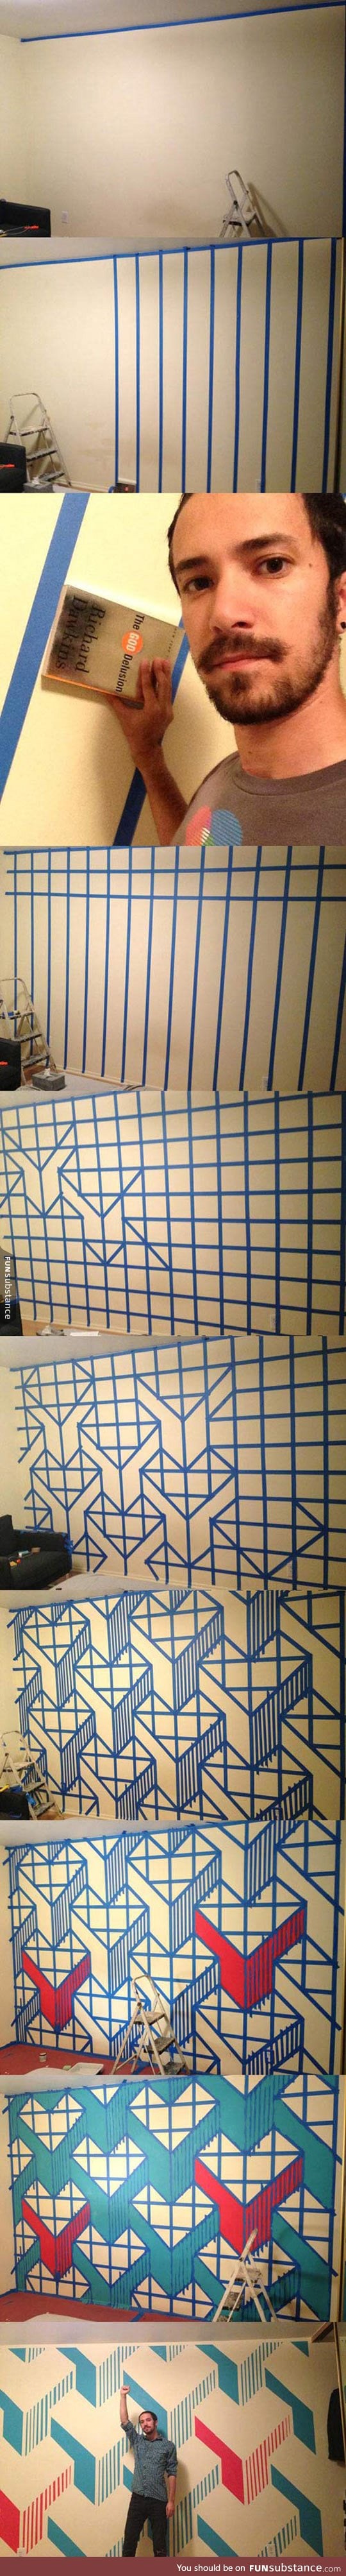 Clever wall design